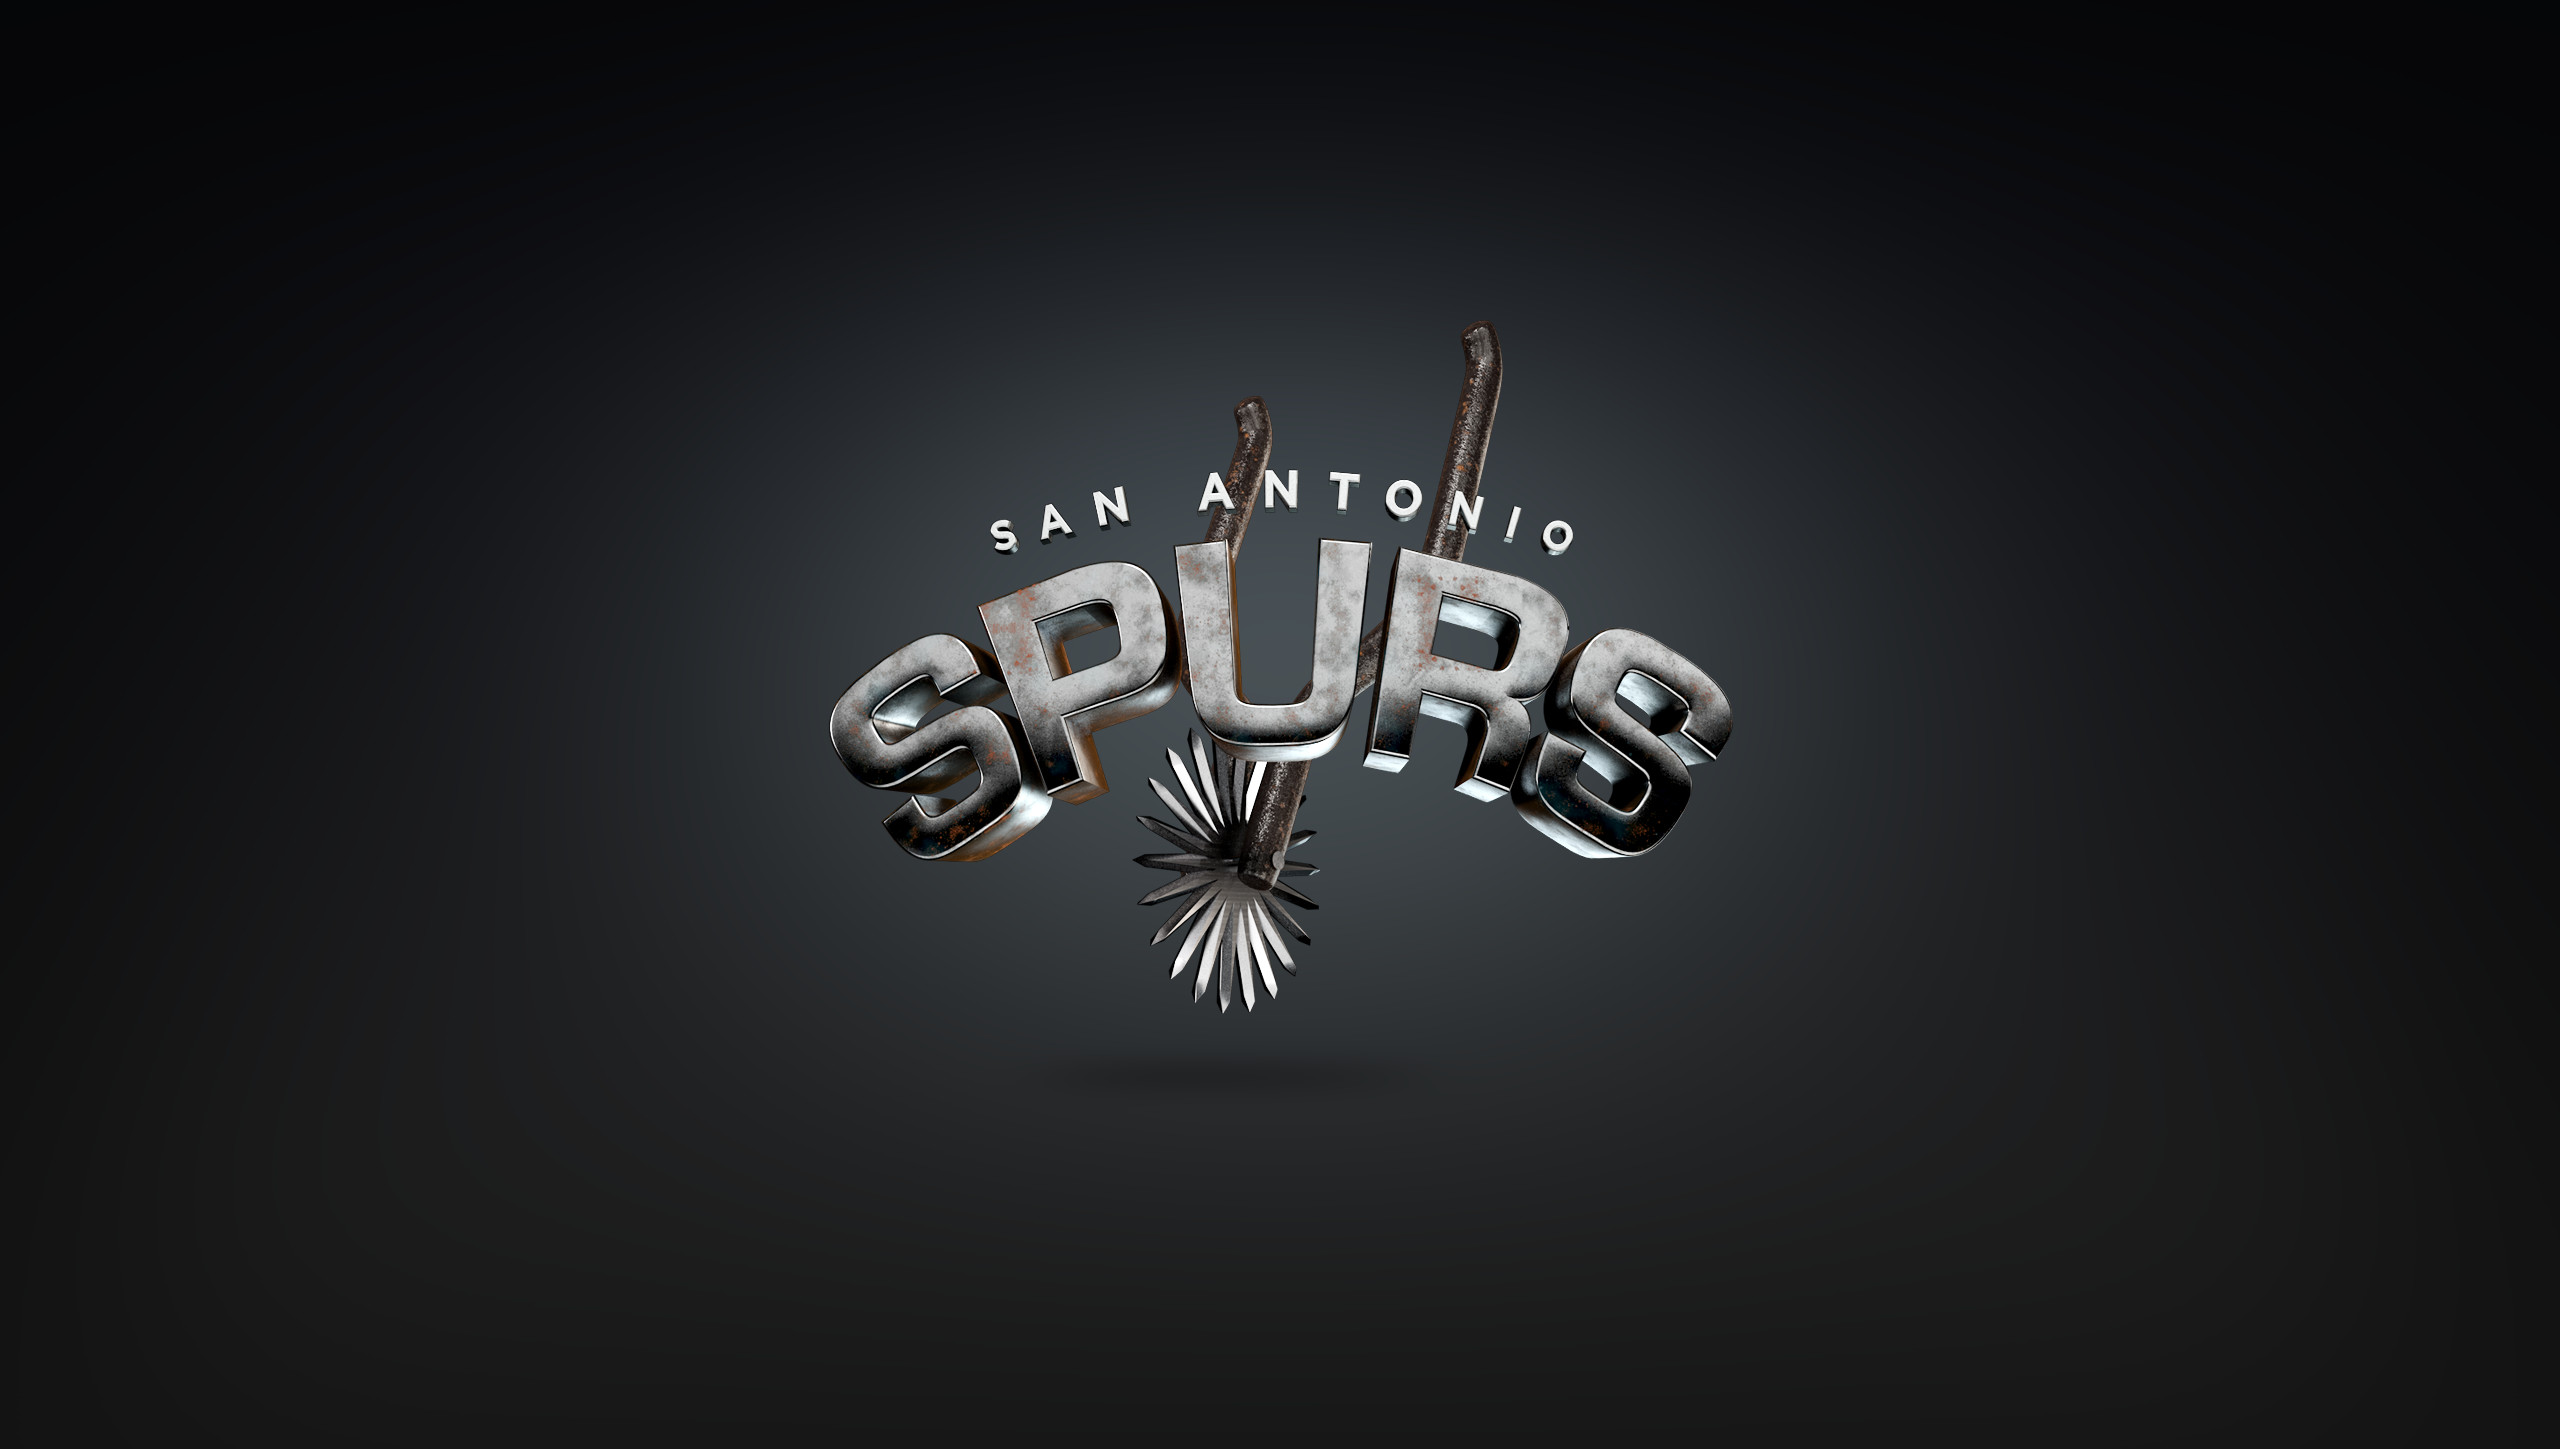 Spurs Wallpaper background picture